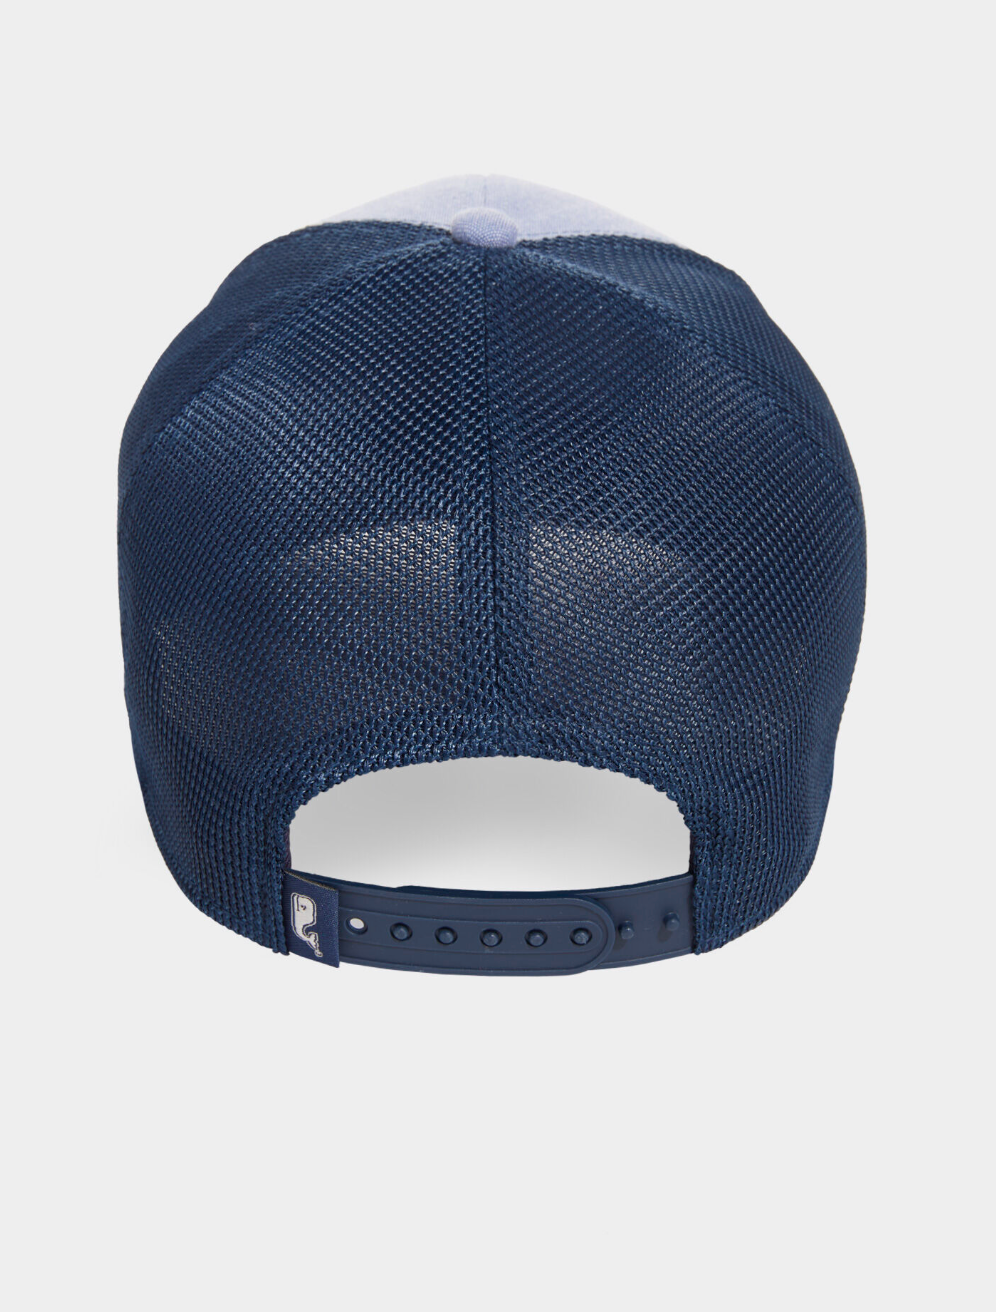 Chambray Leather Patch Trucker Hat Vineyard Navy